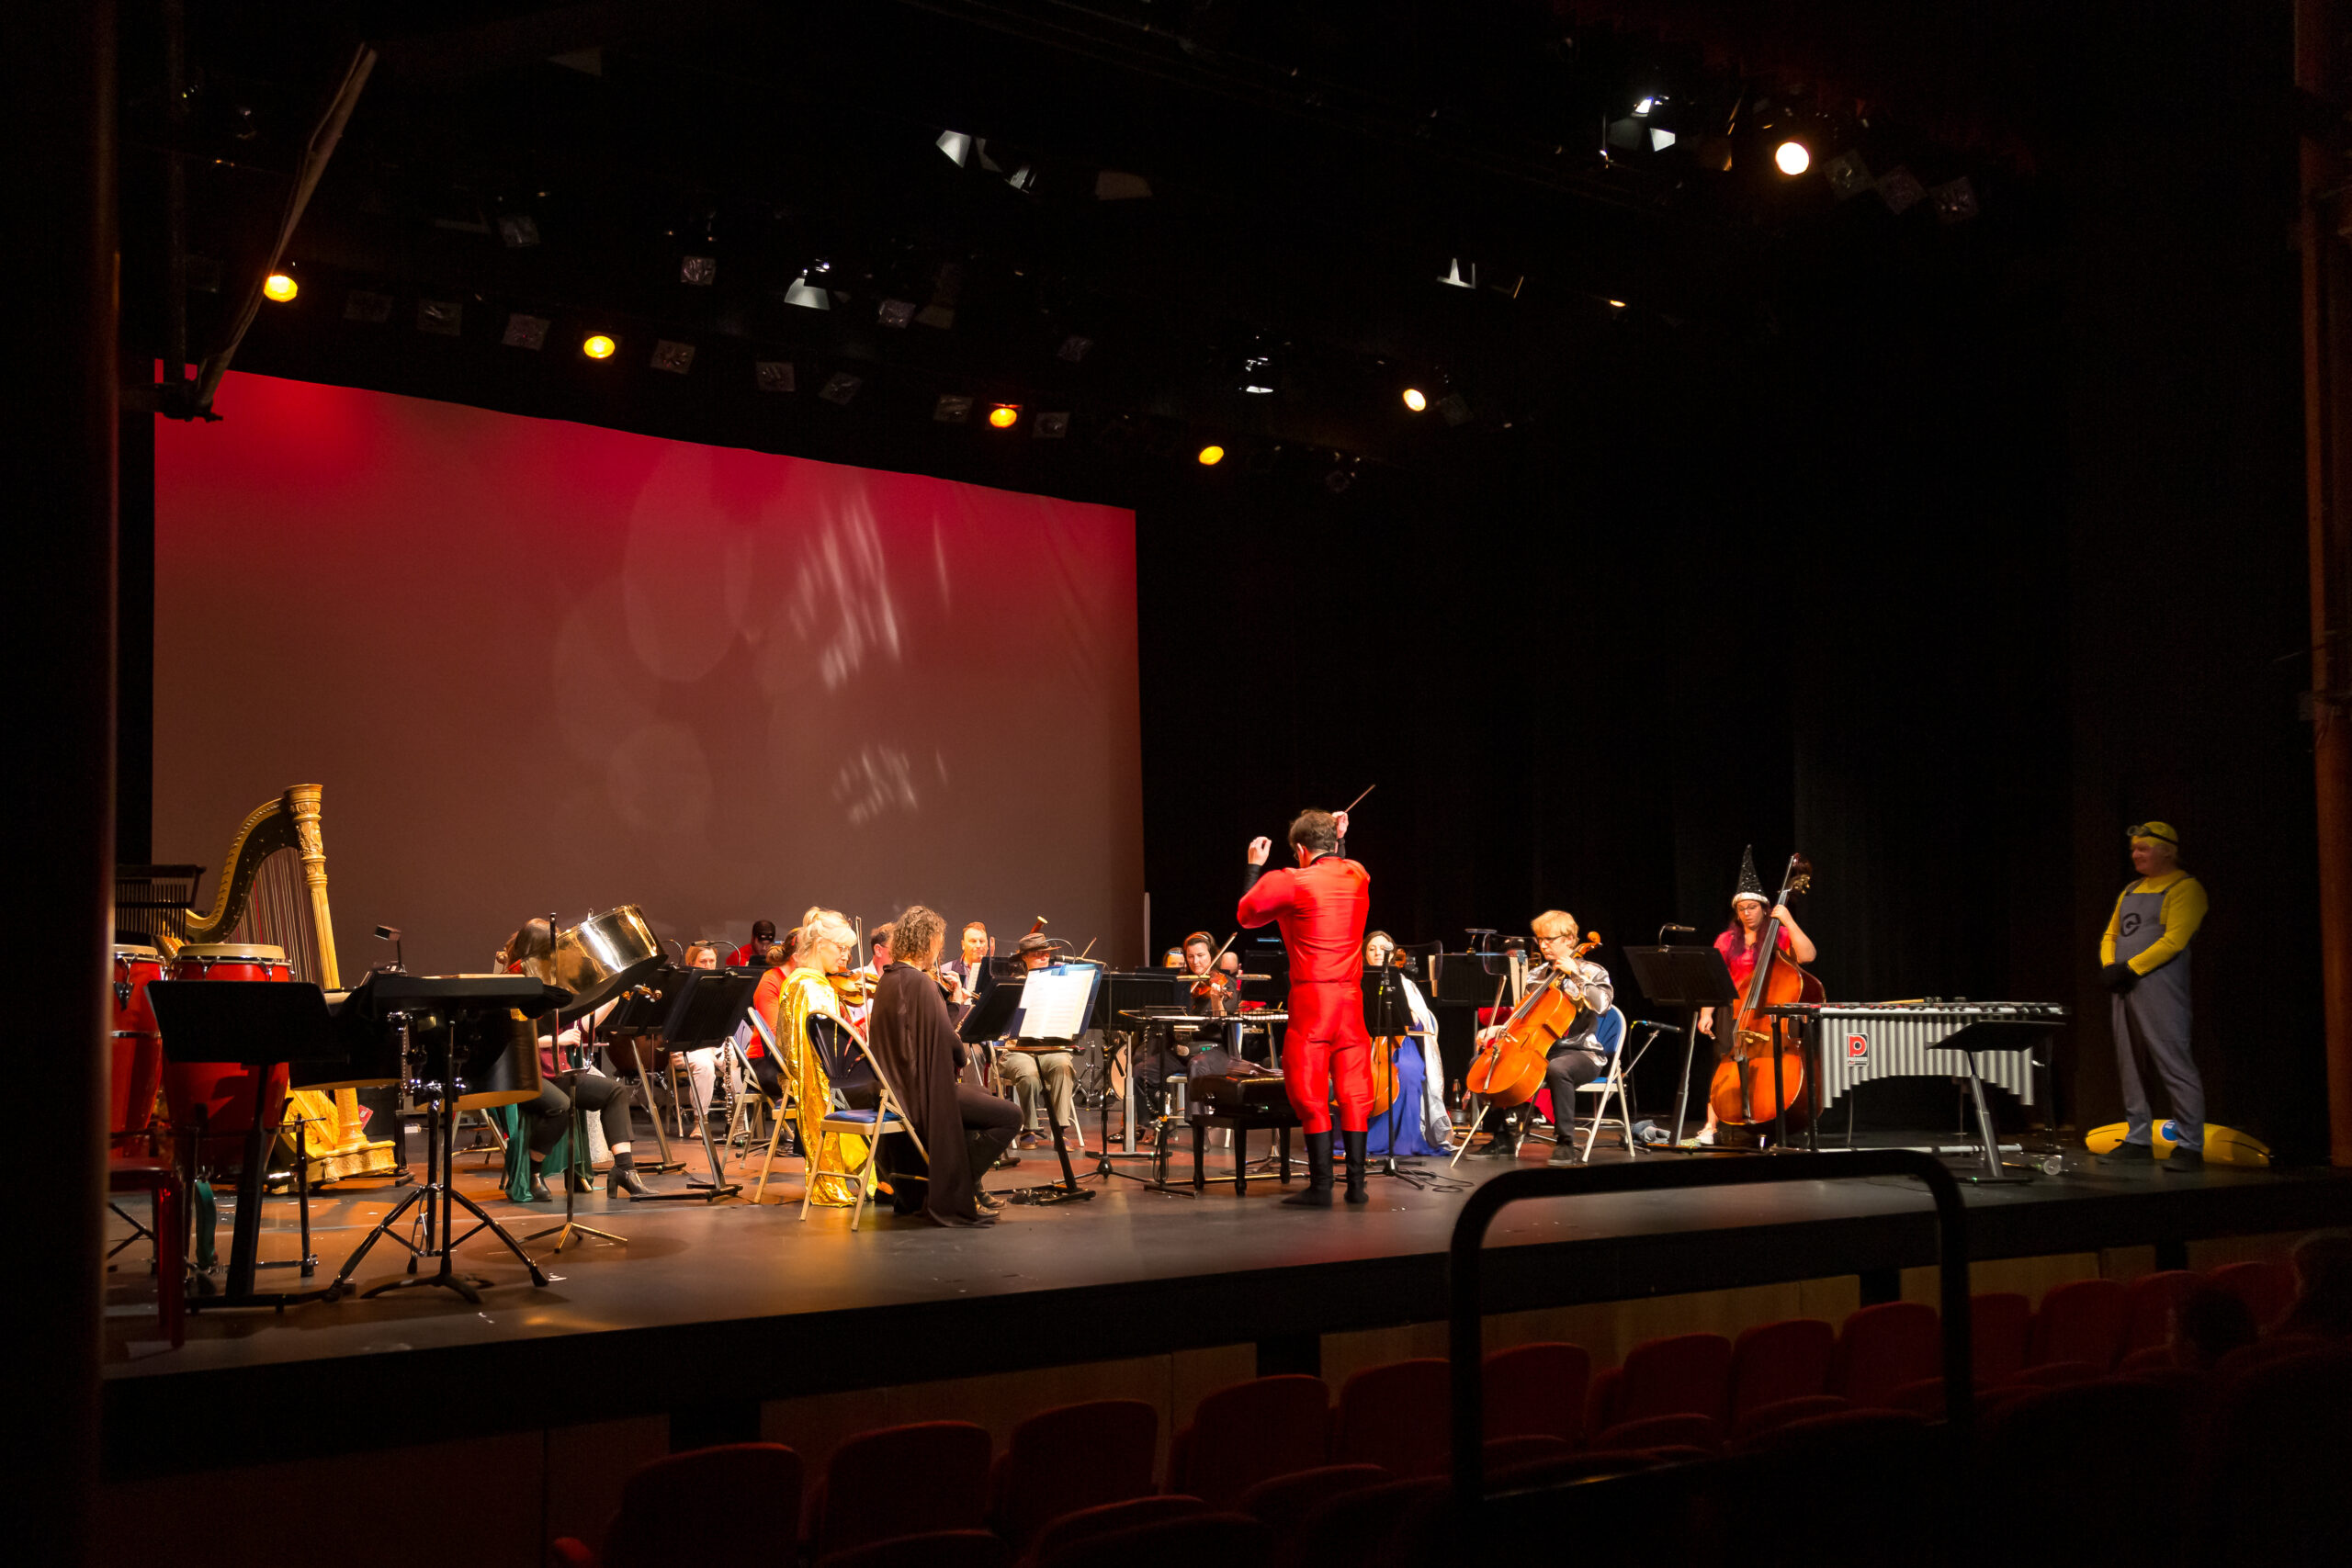 Orchestra Of The Swan brings movie magic to The Courtyard: An orchestra in fancy dress playing in front of a screen and lights